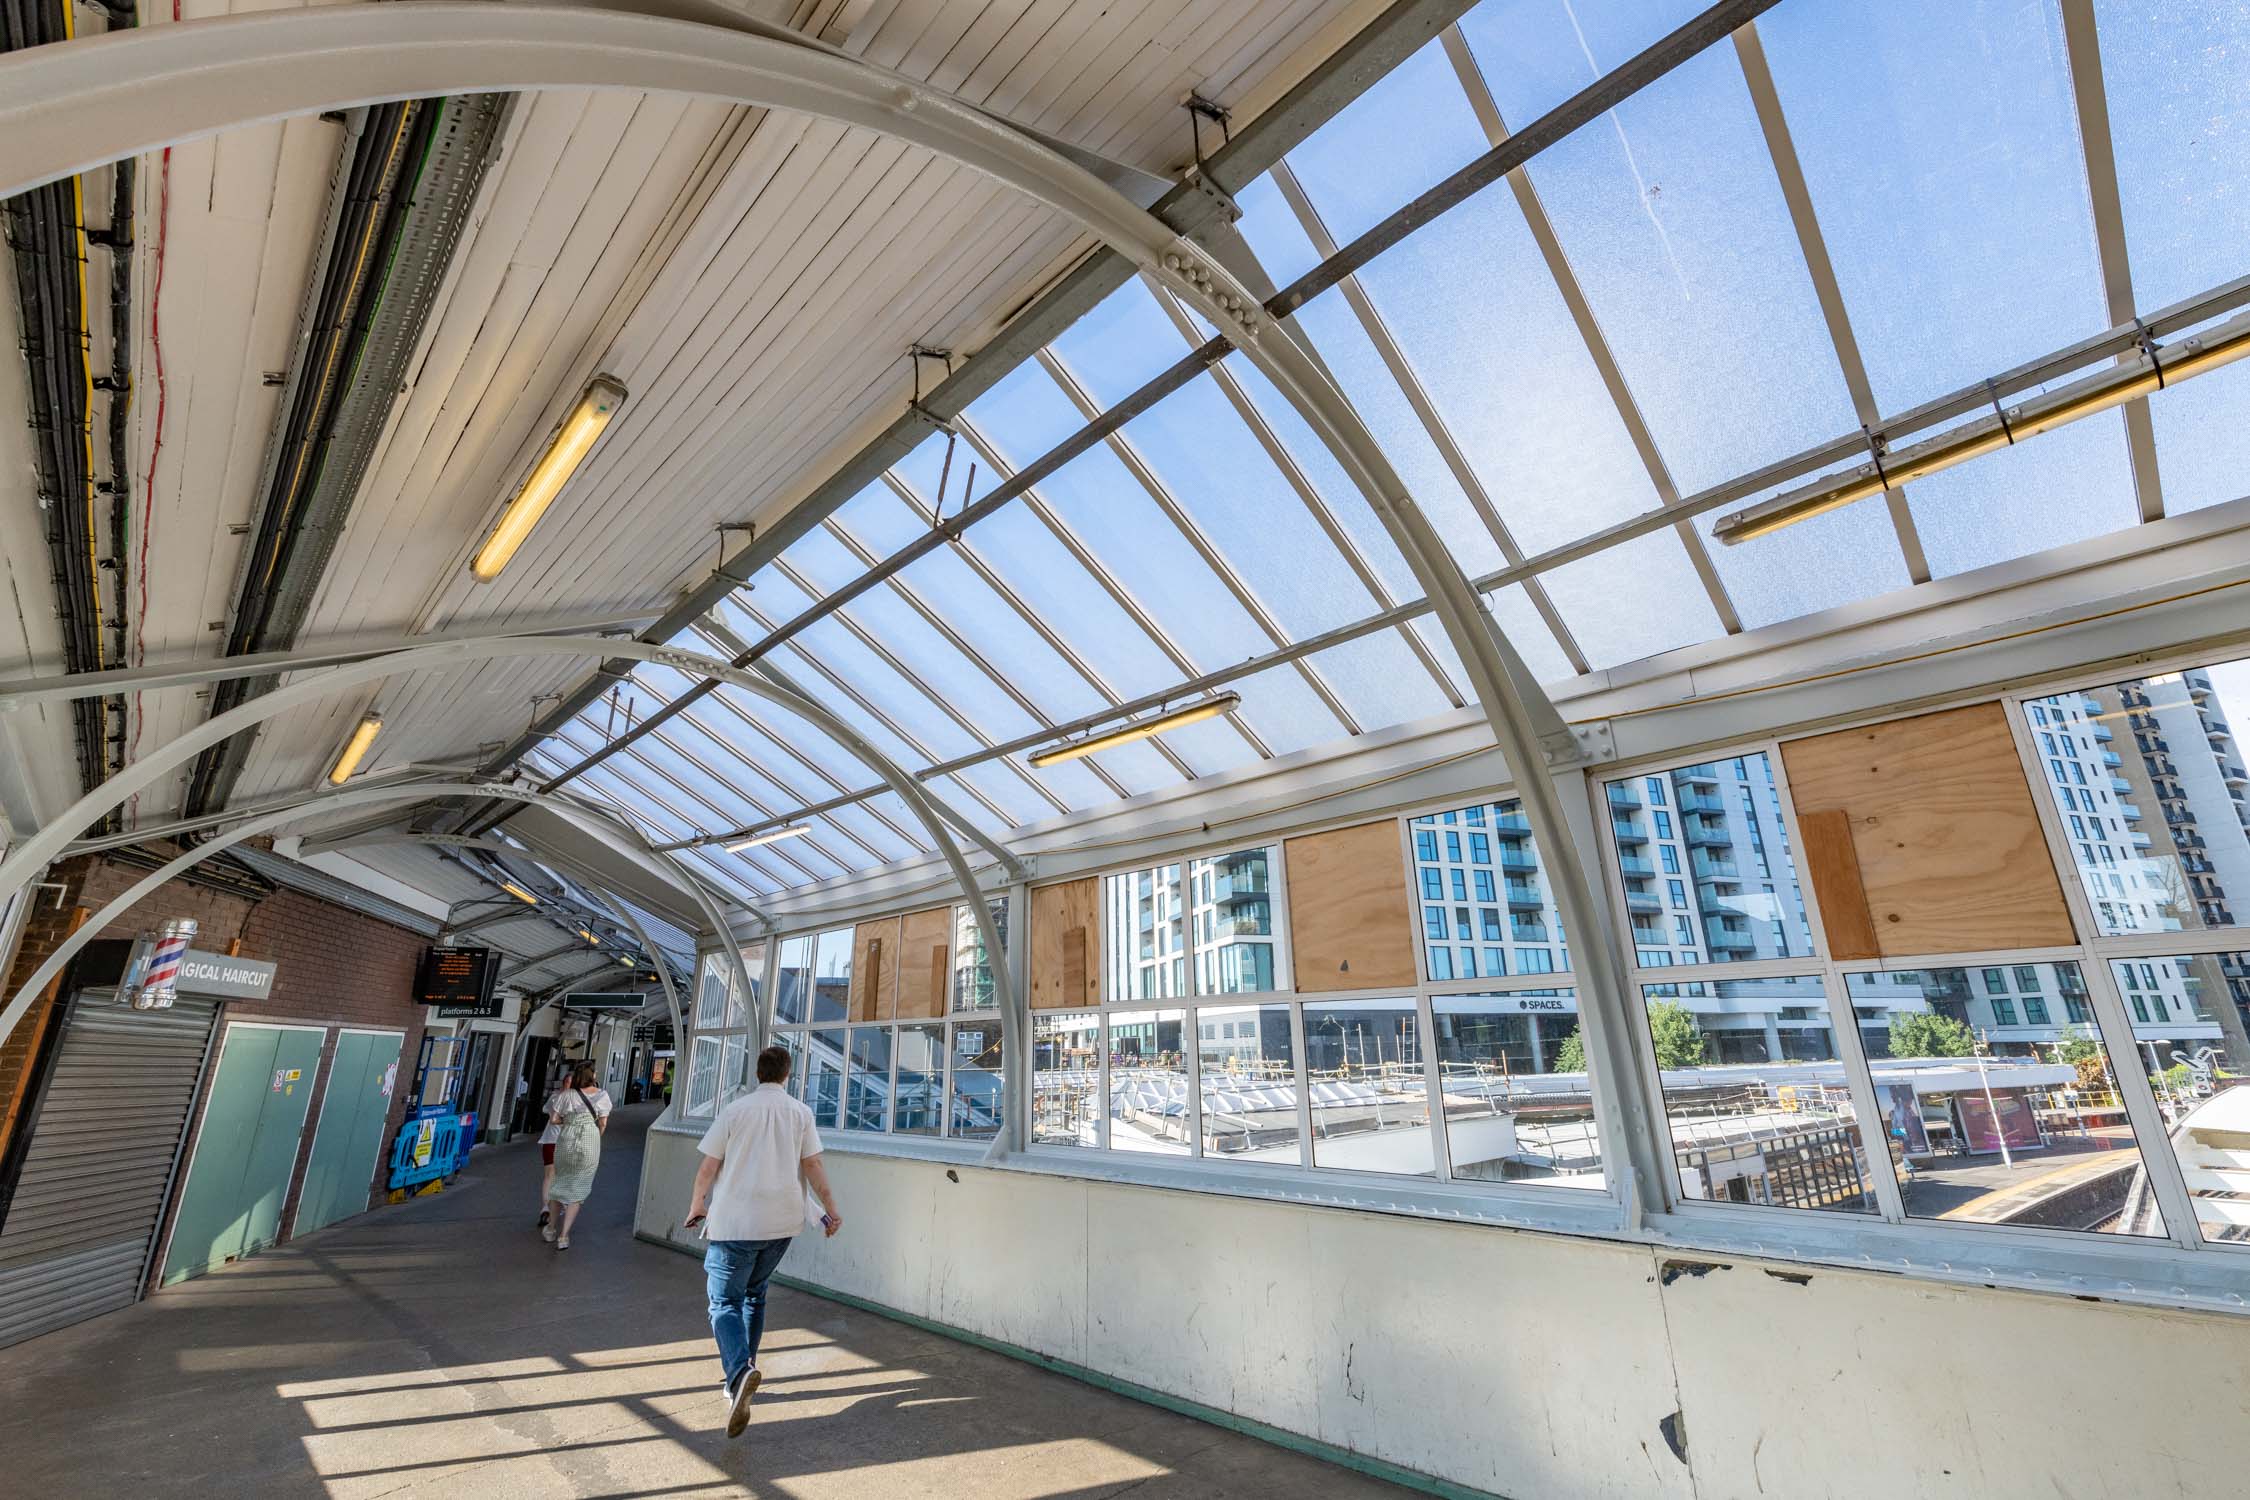 Case Study Sutton Station – Breathing new life into an old station